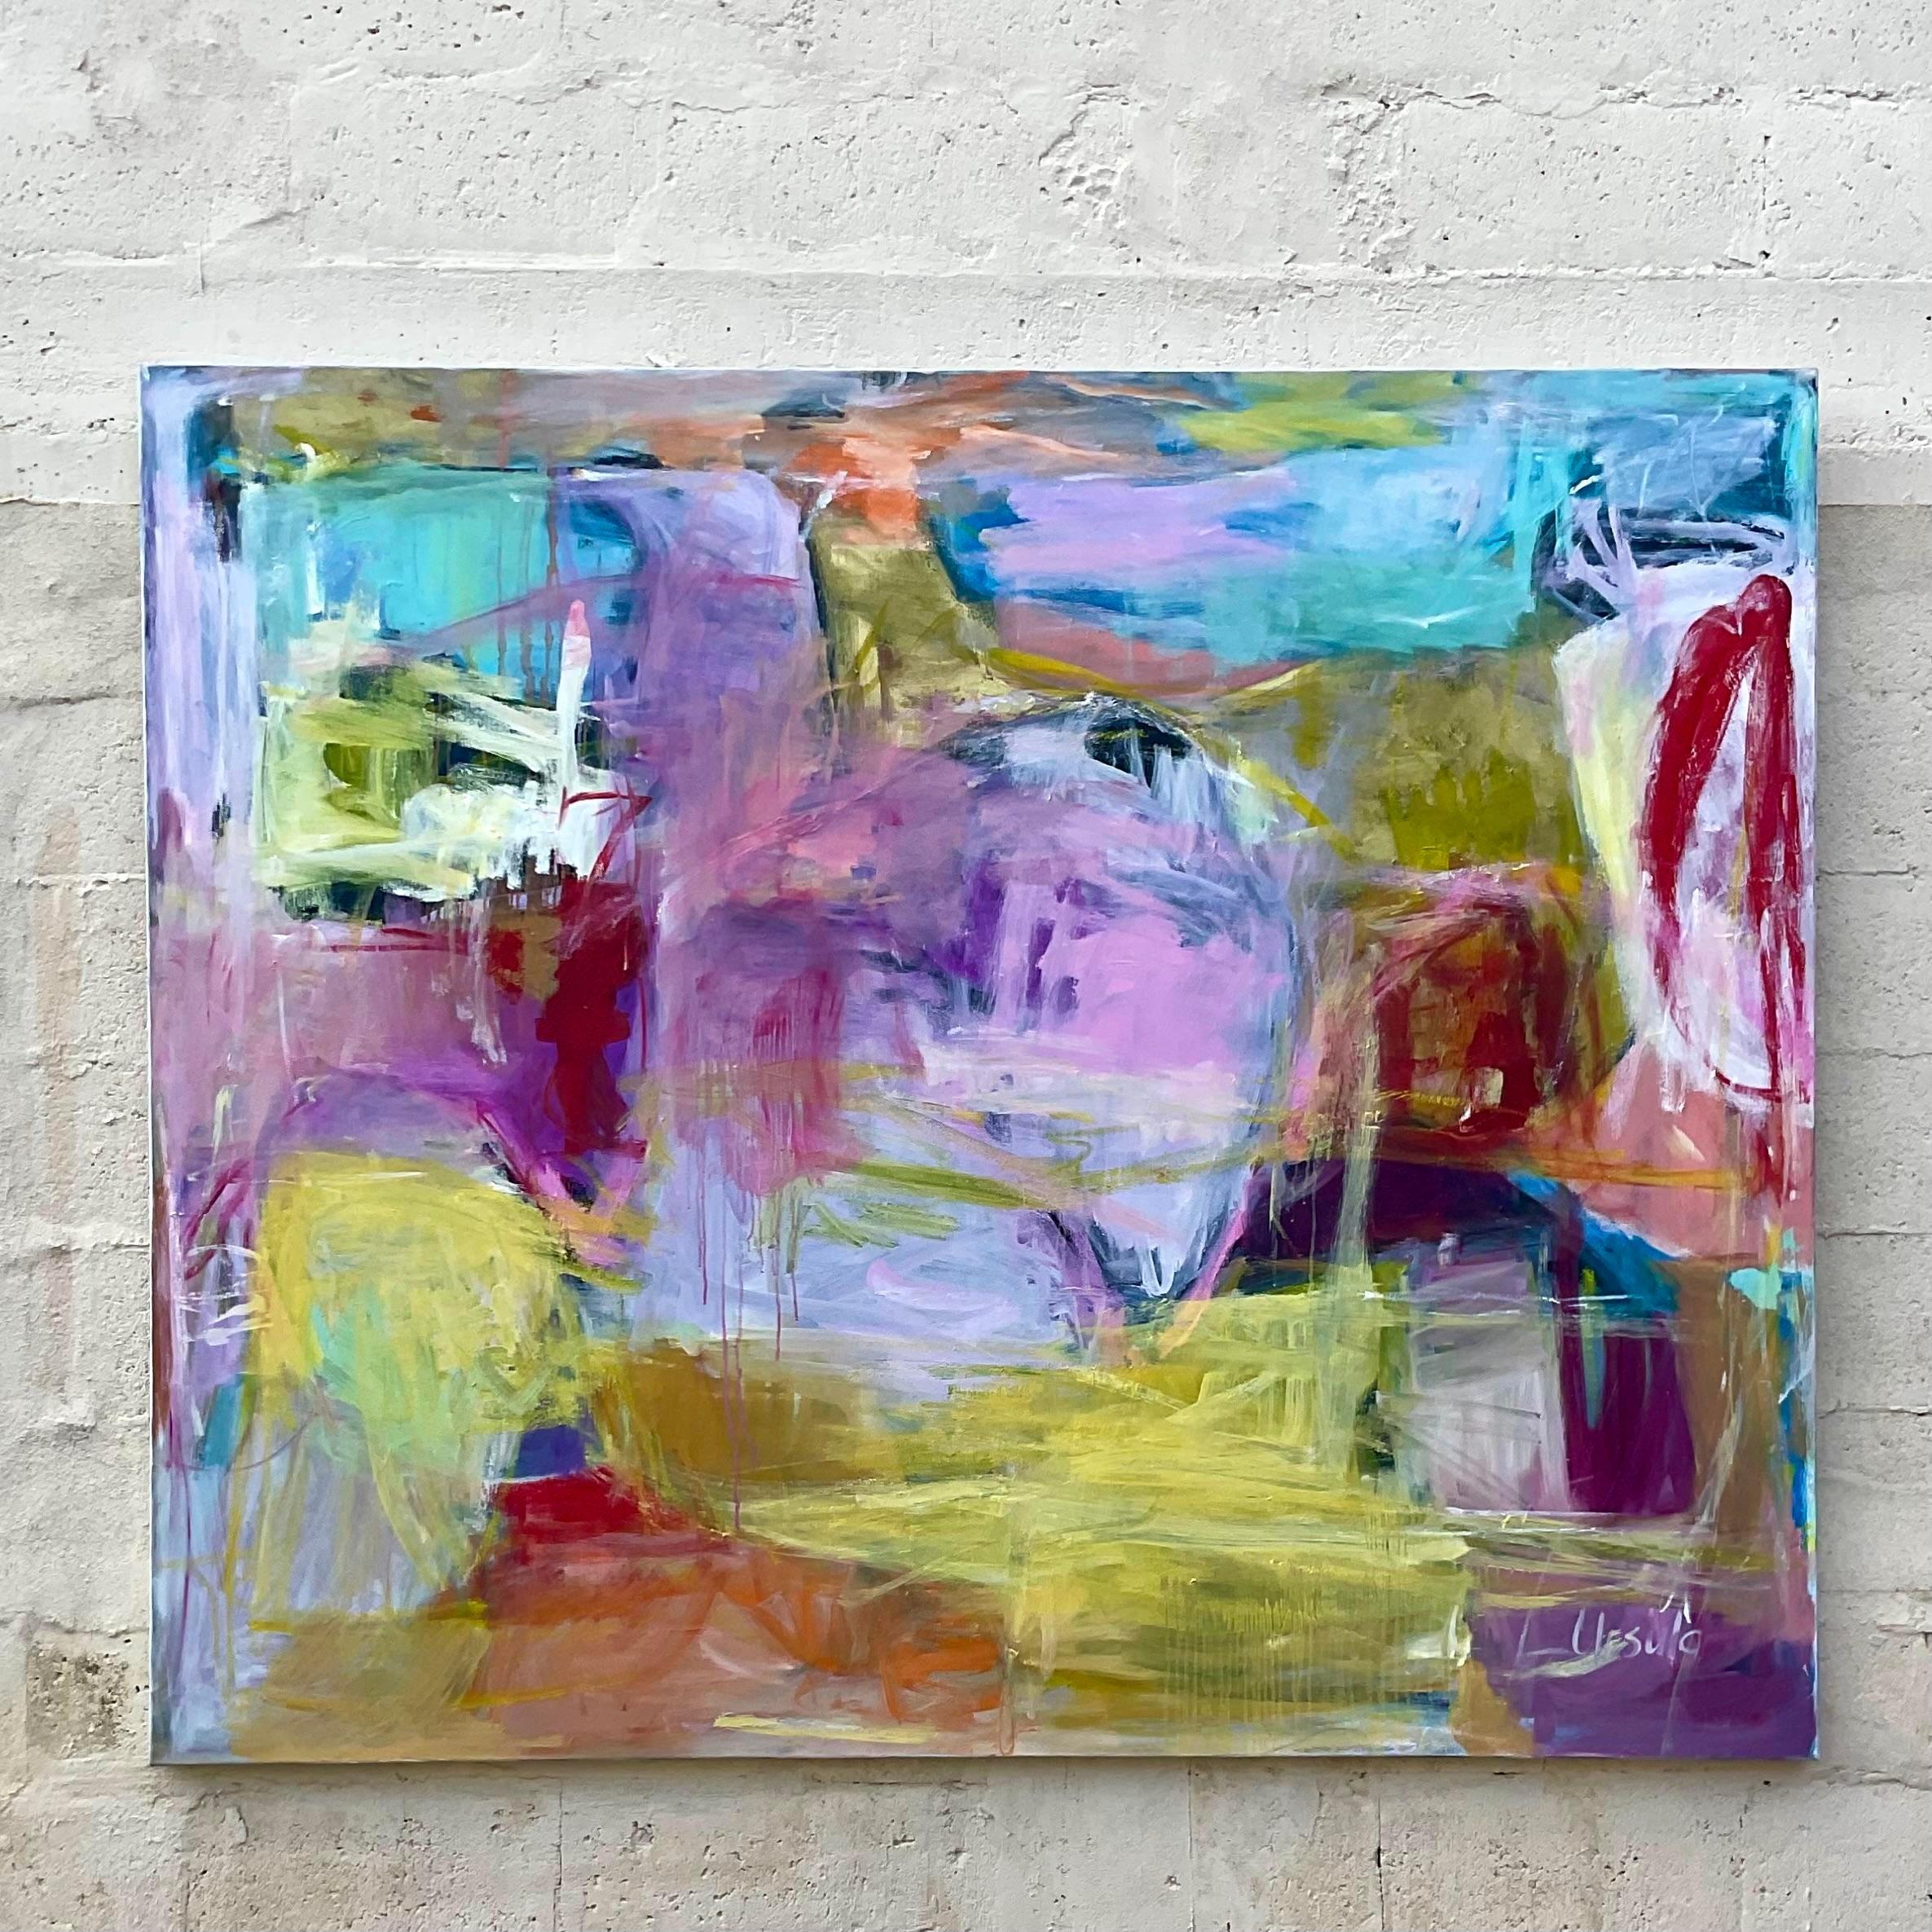 A striking vintage Boho original oil painting. A chic Abstract high energy composition in brilliant clear colors. Signed by the artist. Acquired from a Palm Beach estate.